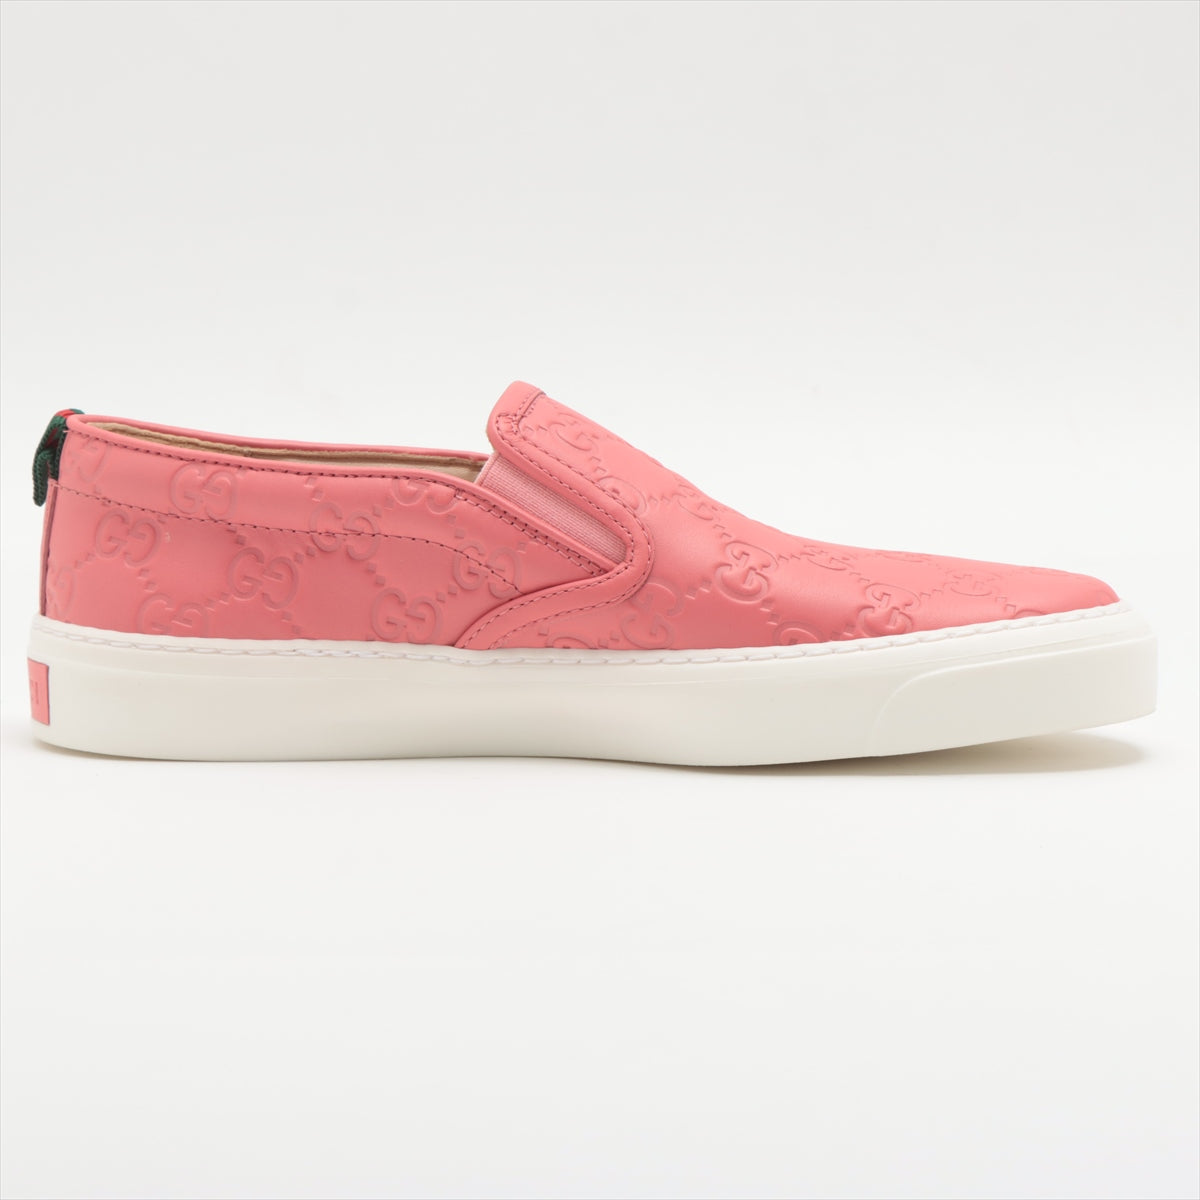 Gucci Double G Leather Slip-on 36 Ladies' Pink 408510 There is a box